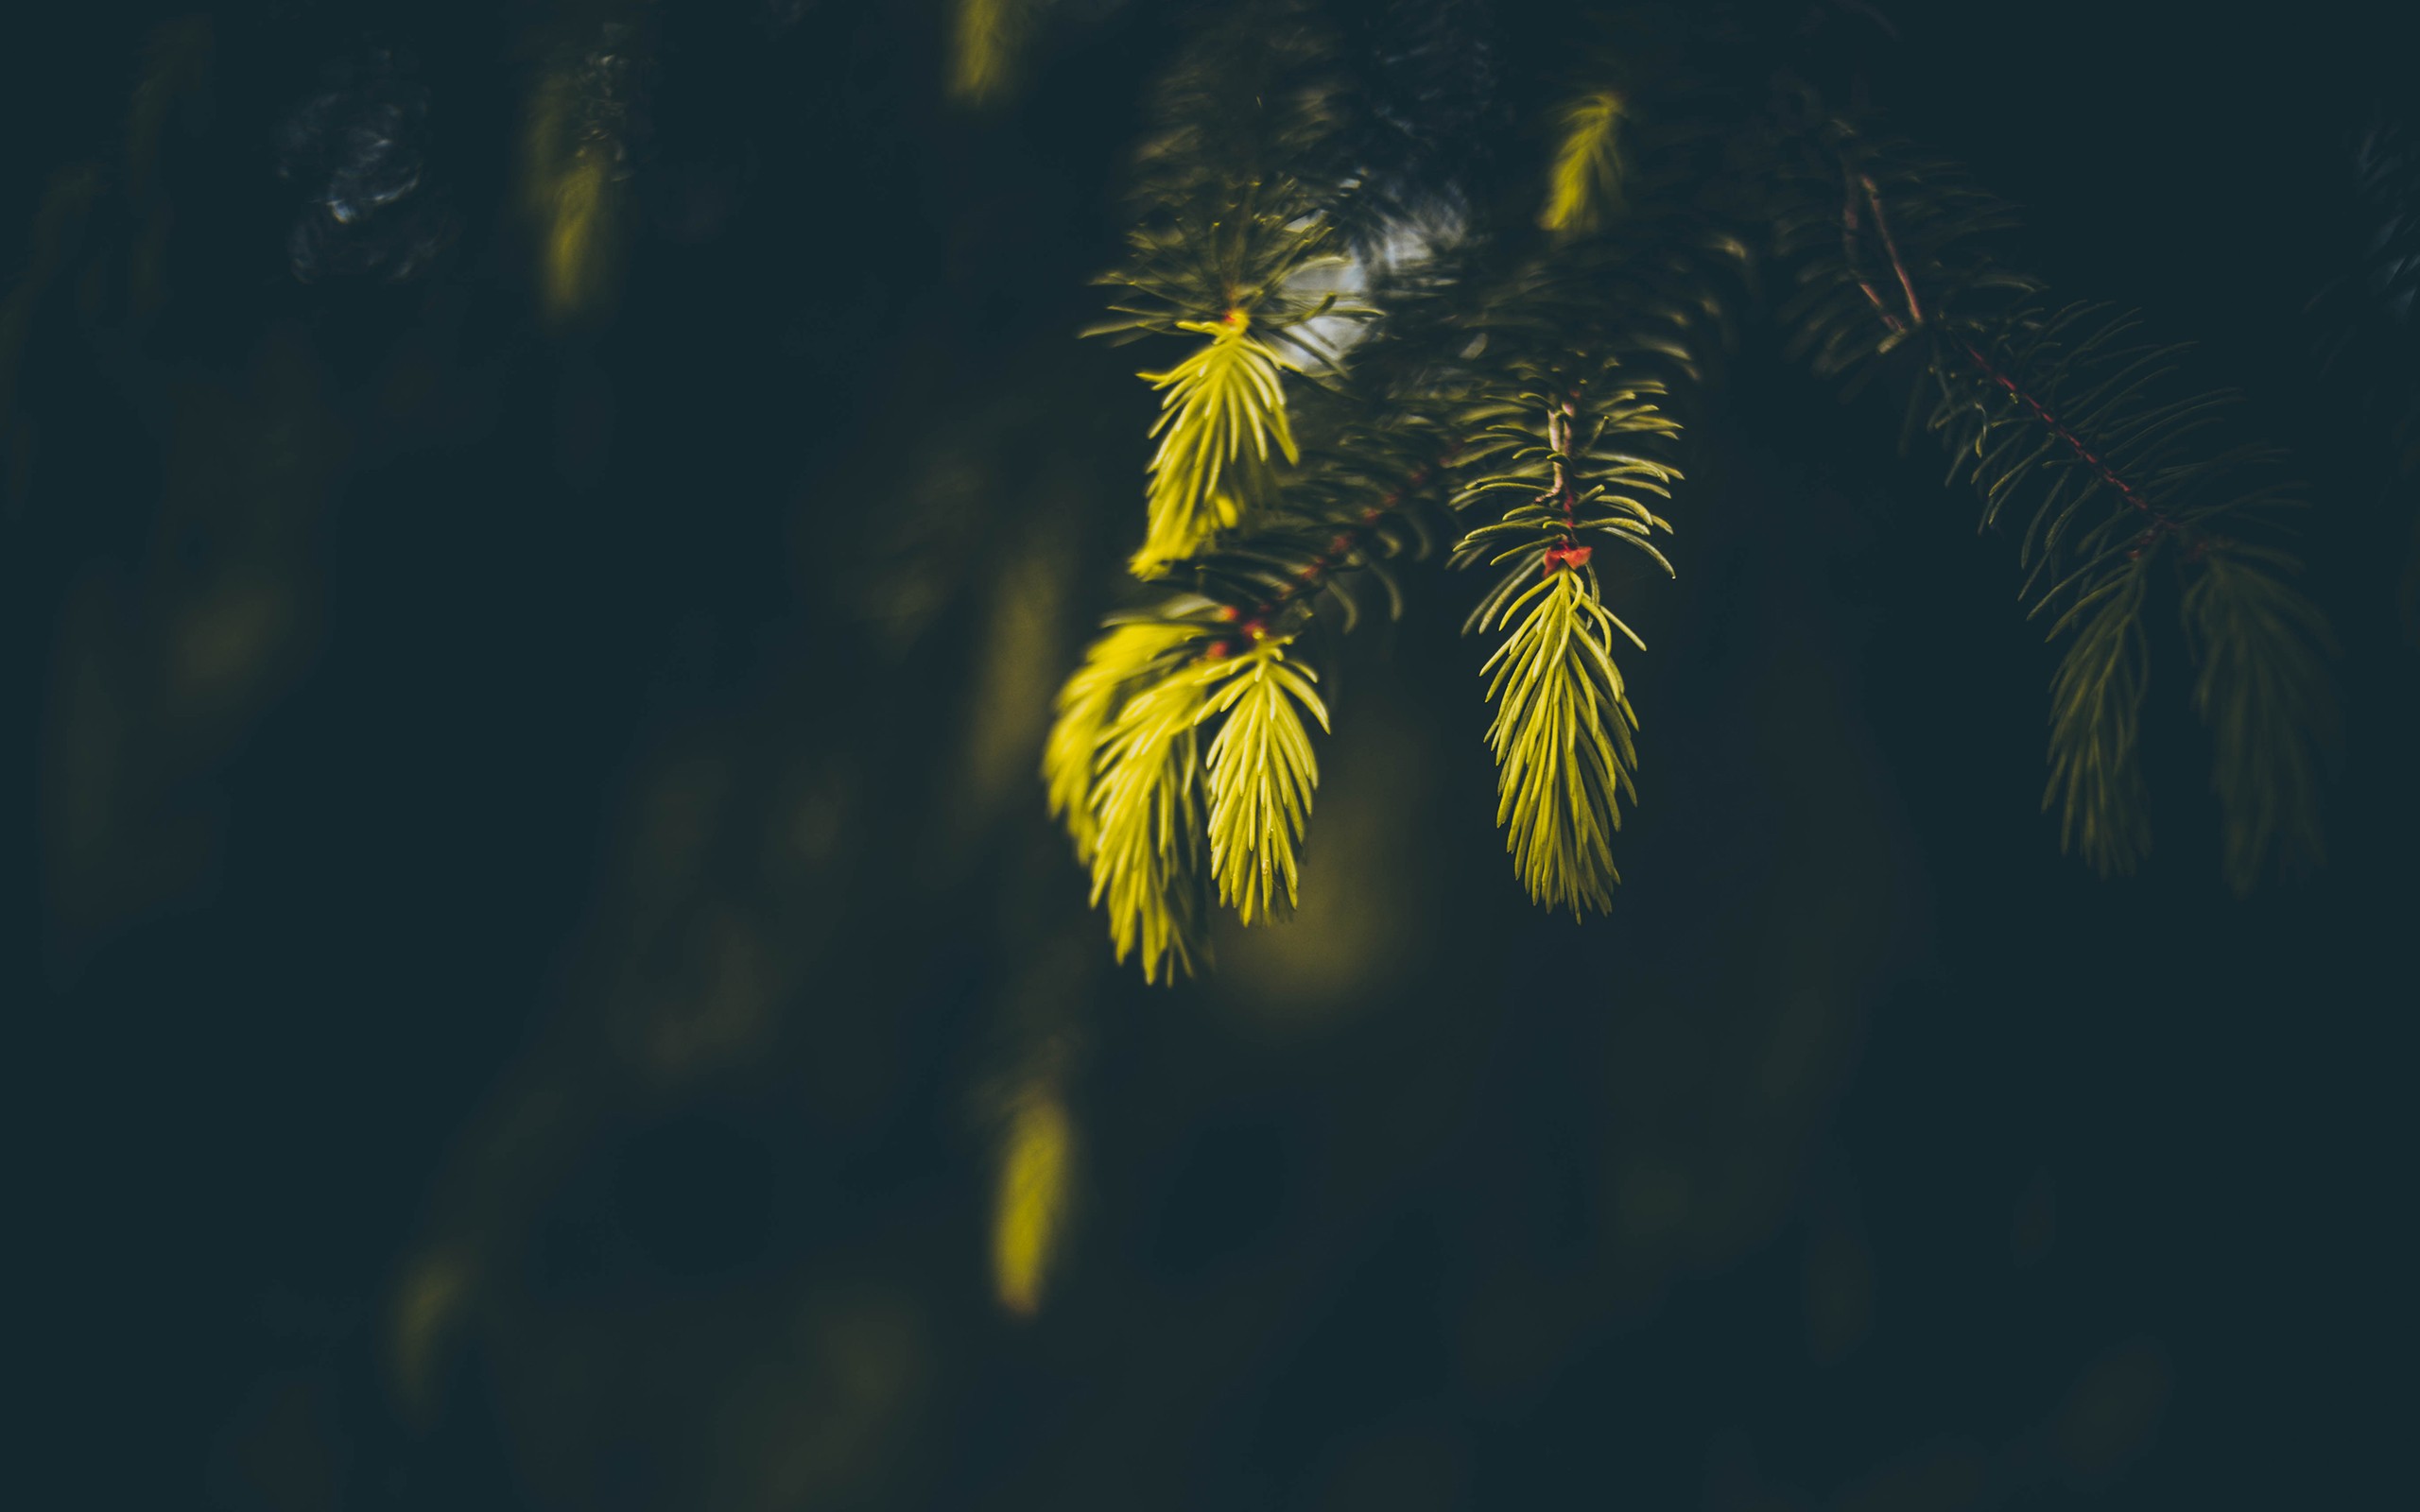 Spruce Macro Sunlight Depth Of Field Blurred Nature Photography 2560x1600